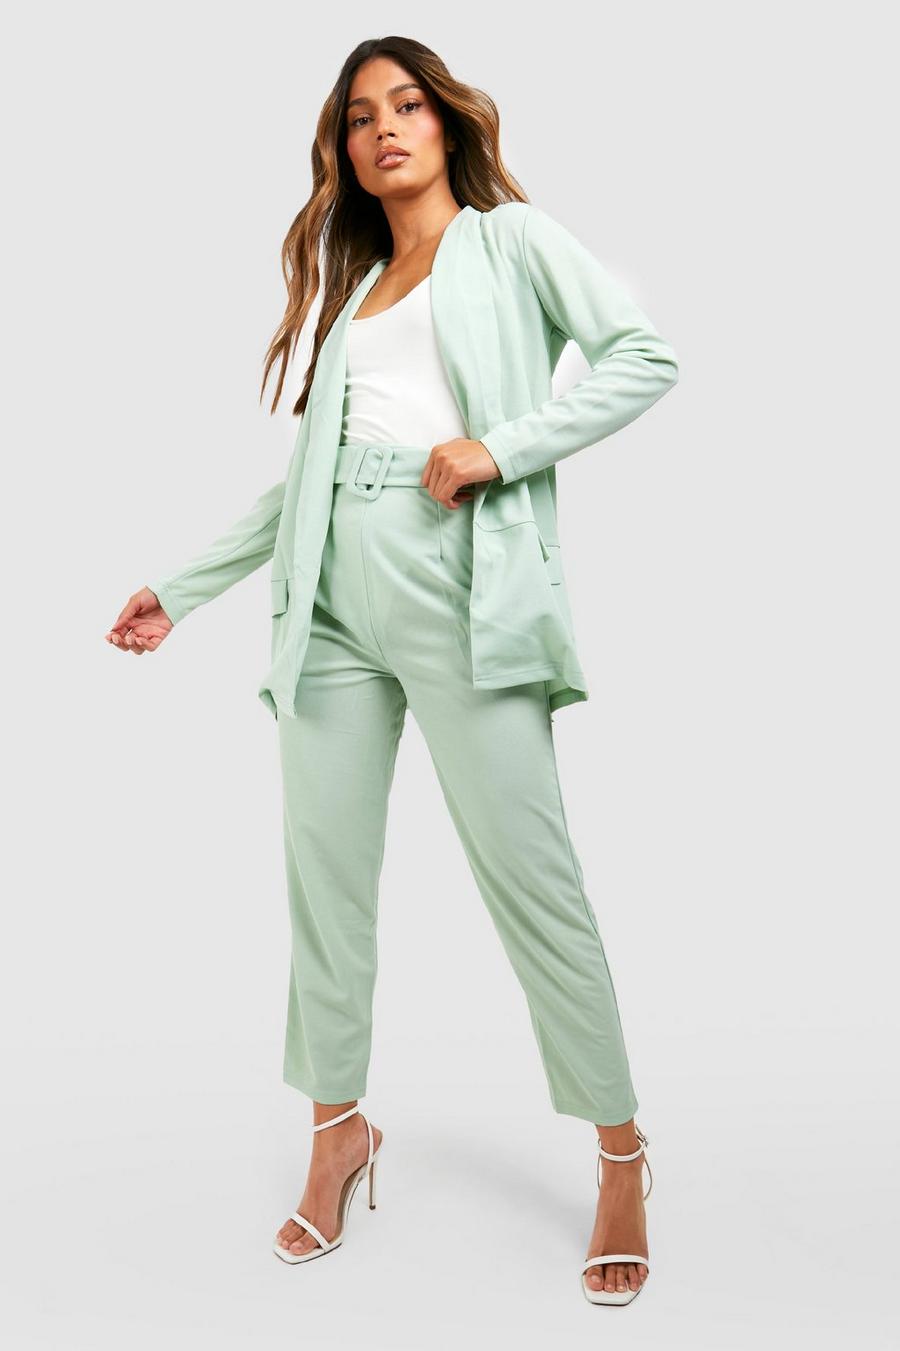 Sage green Tailored Blazer And Self Fabric Belt Trouser Suit